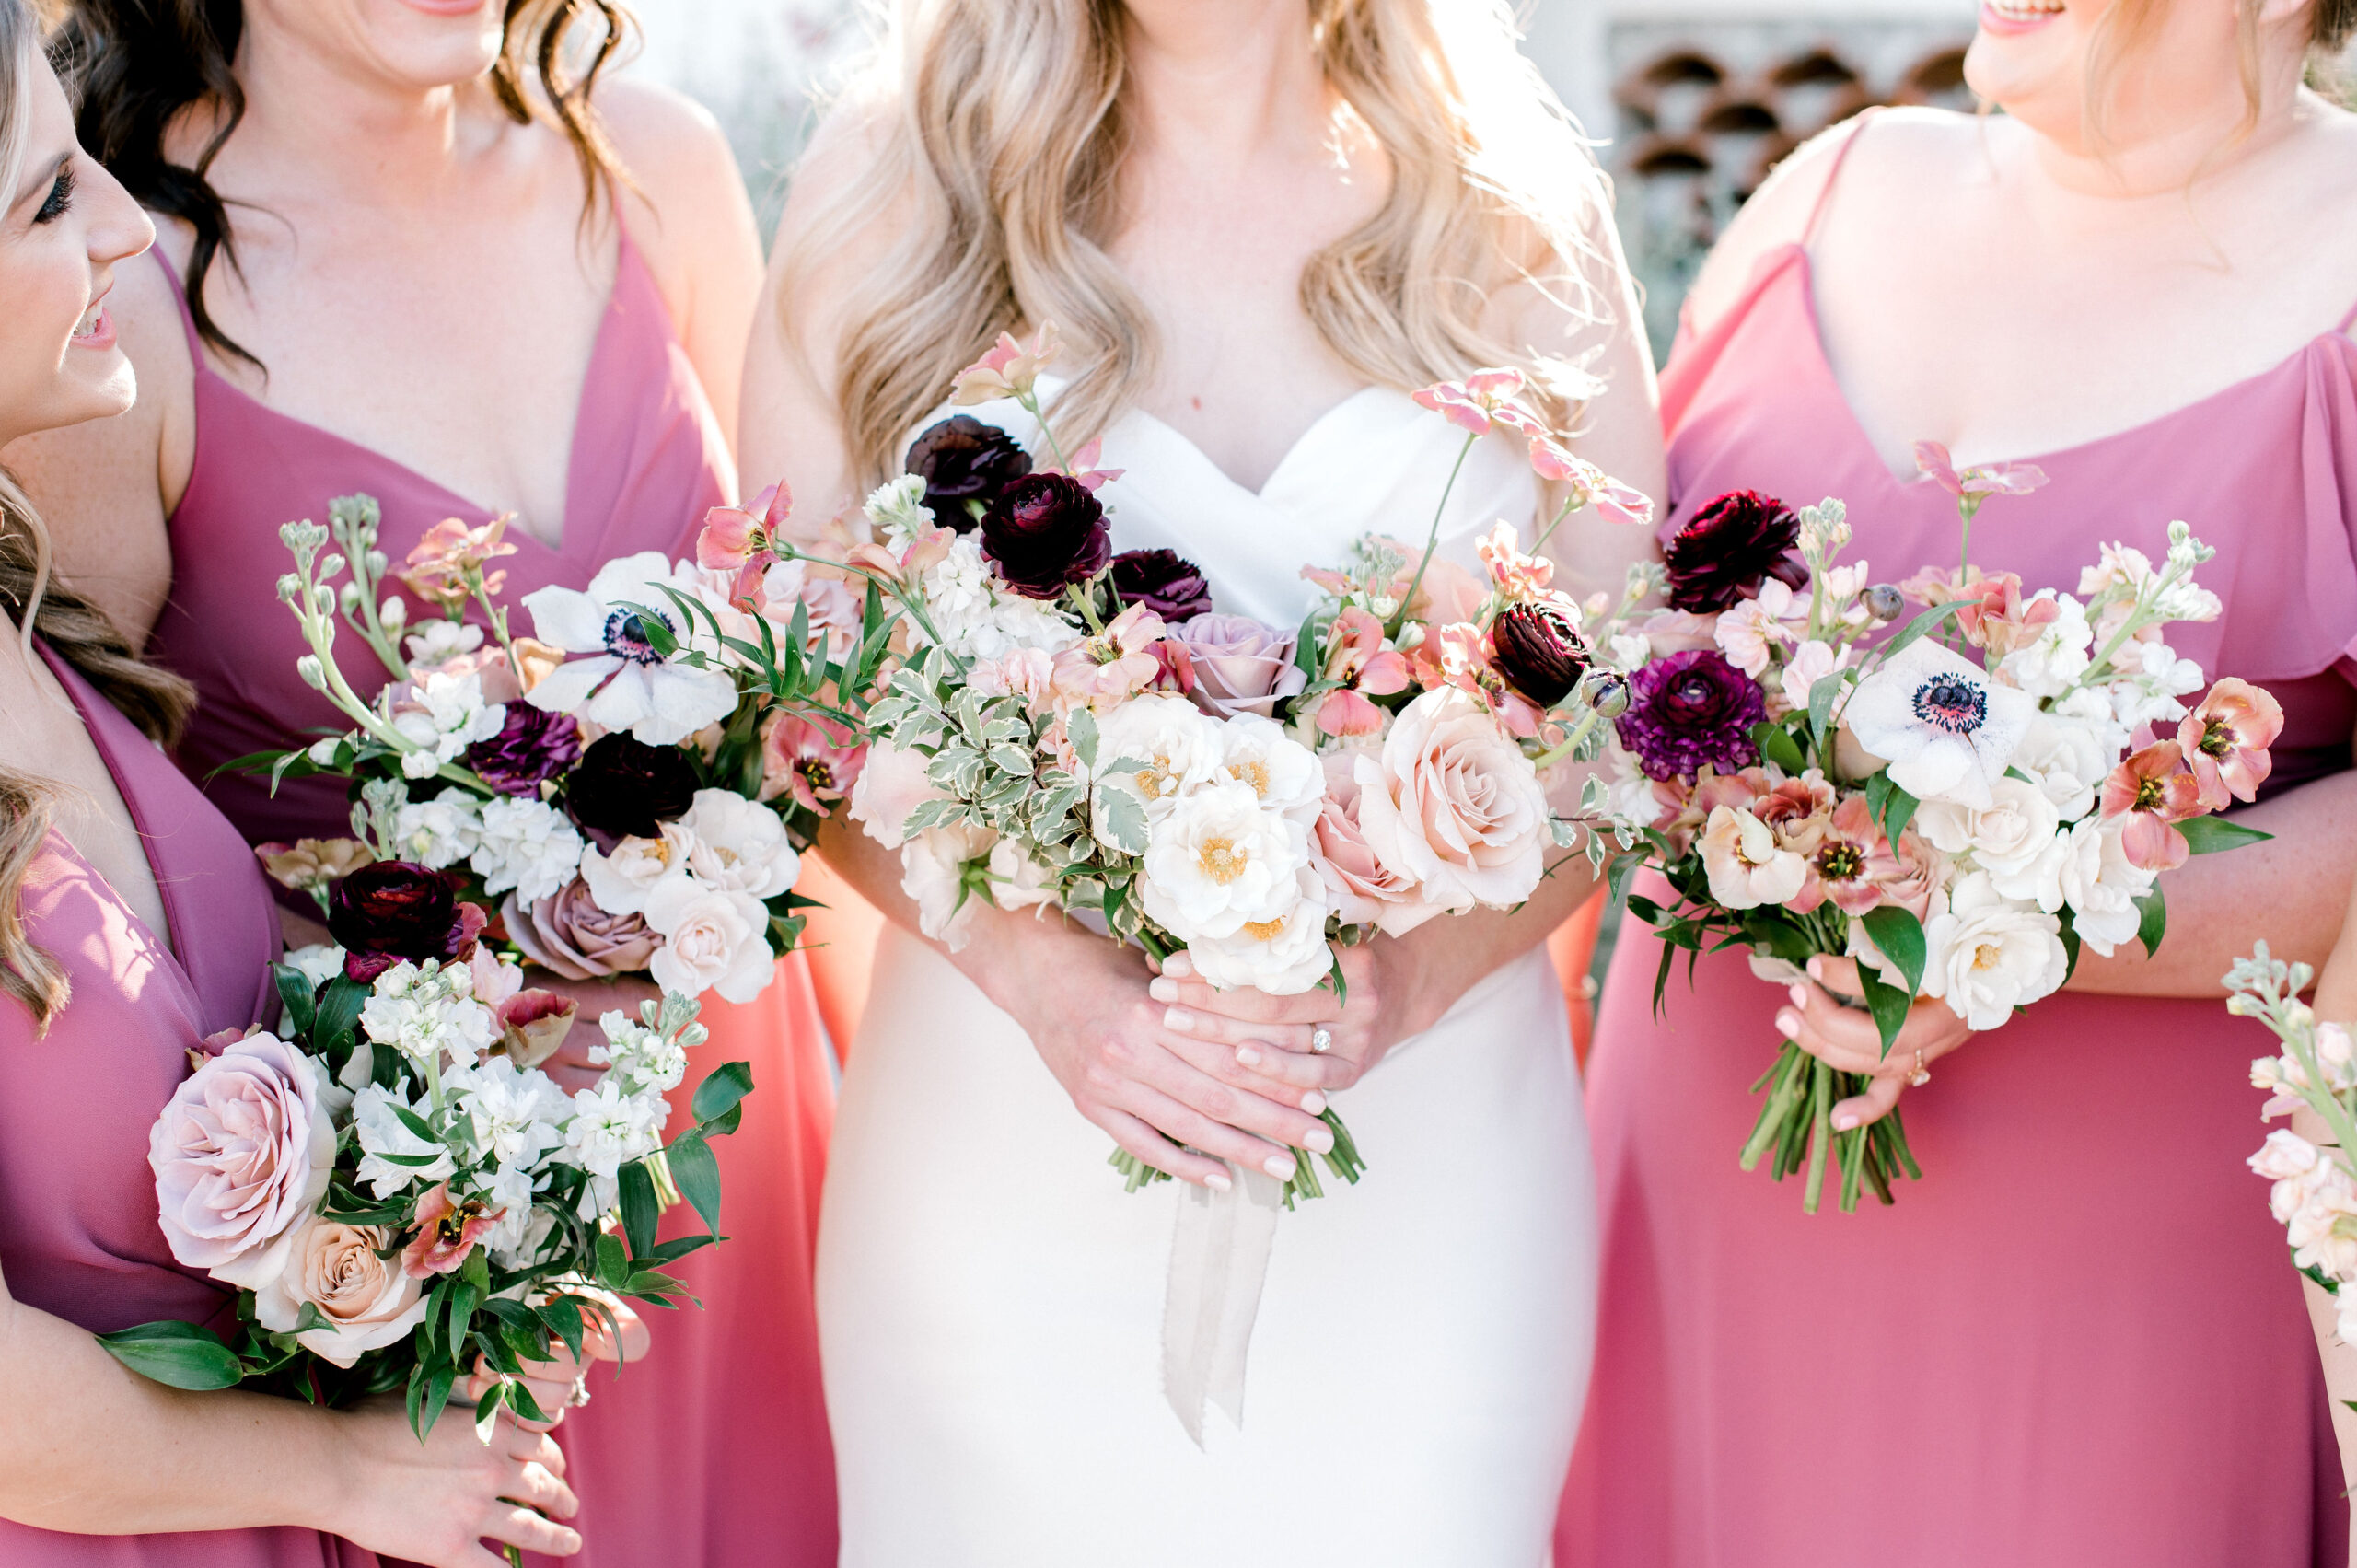 Bridal bouquet and bridesmaid bouquets of white, pink, blush, mauve, and burgundy flowers.